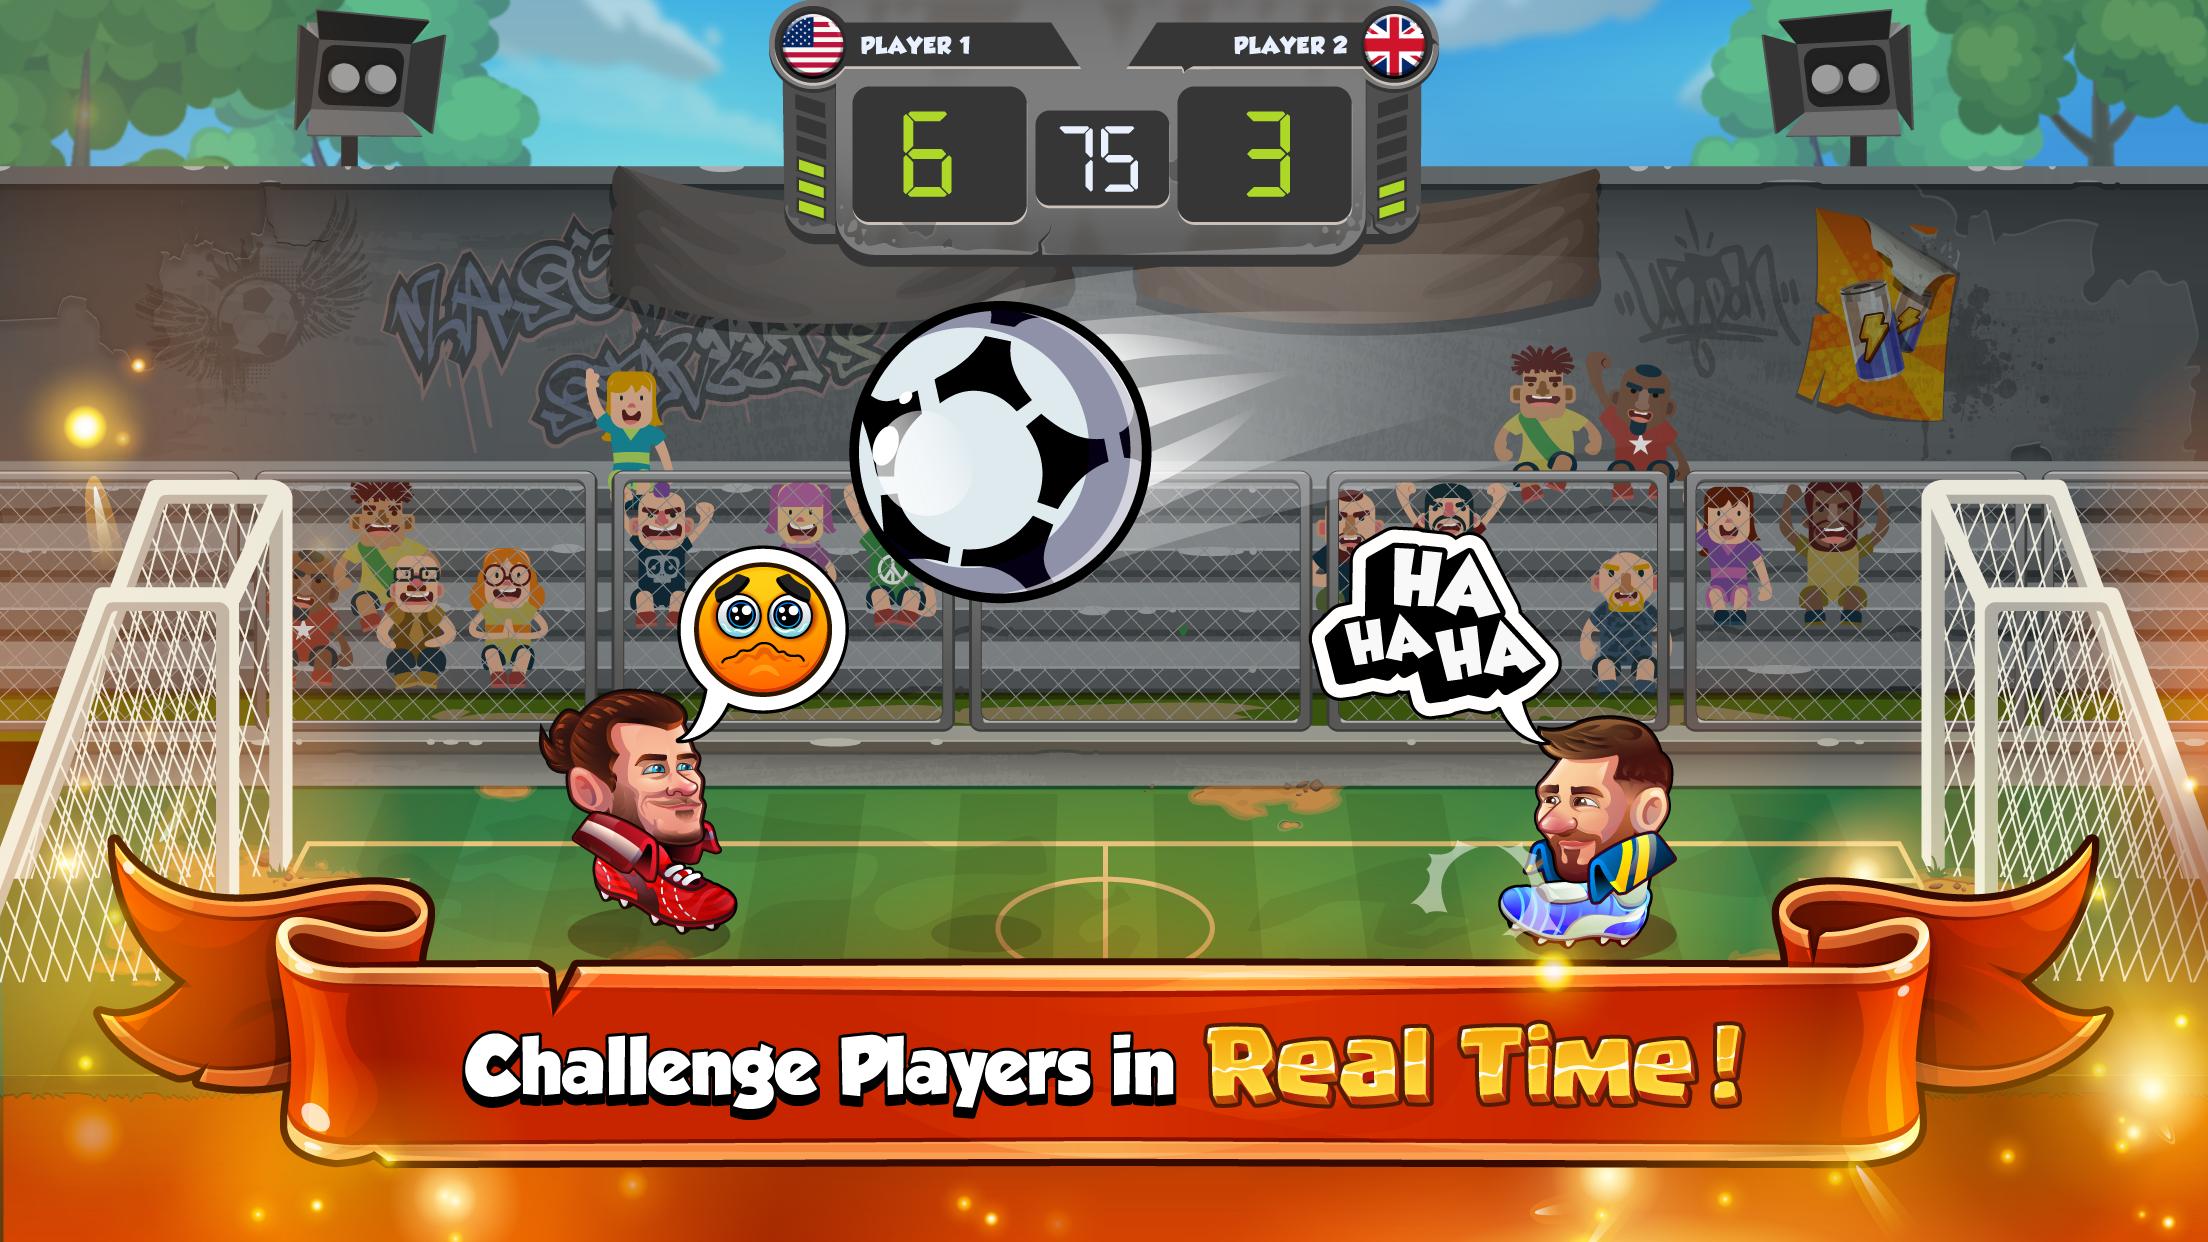 Head Ball 2 for Android - APK Download - 